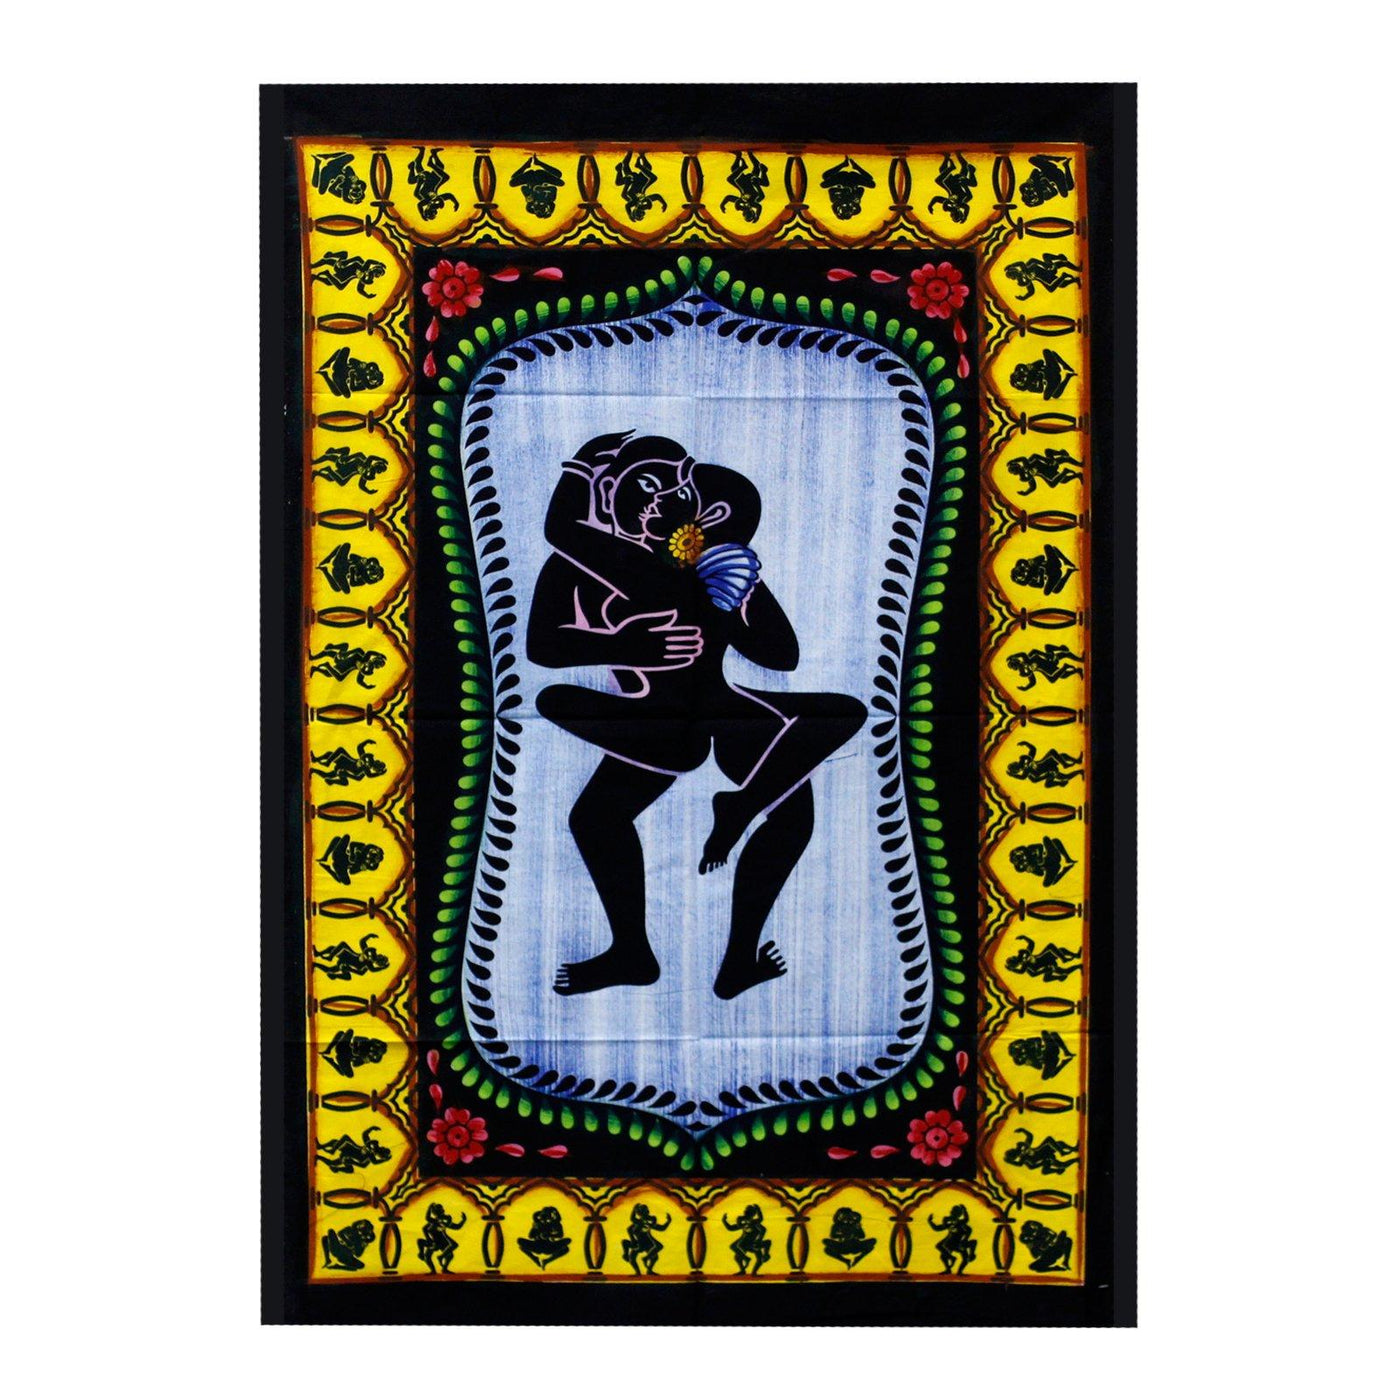 Hand-brushed Cotton Wall Hangings Tapestry, Kama Sutra Design.